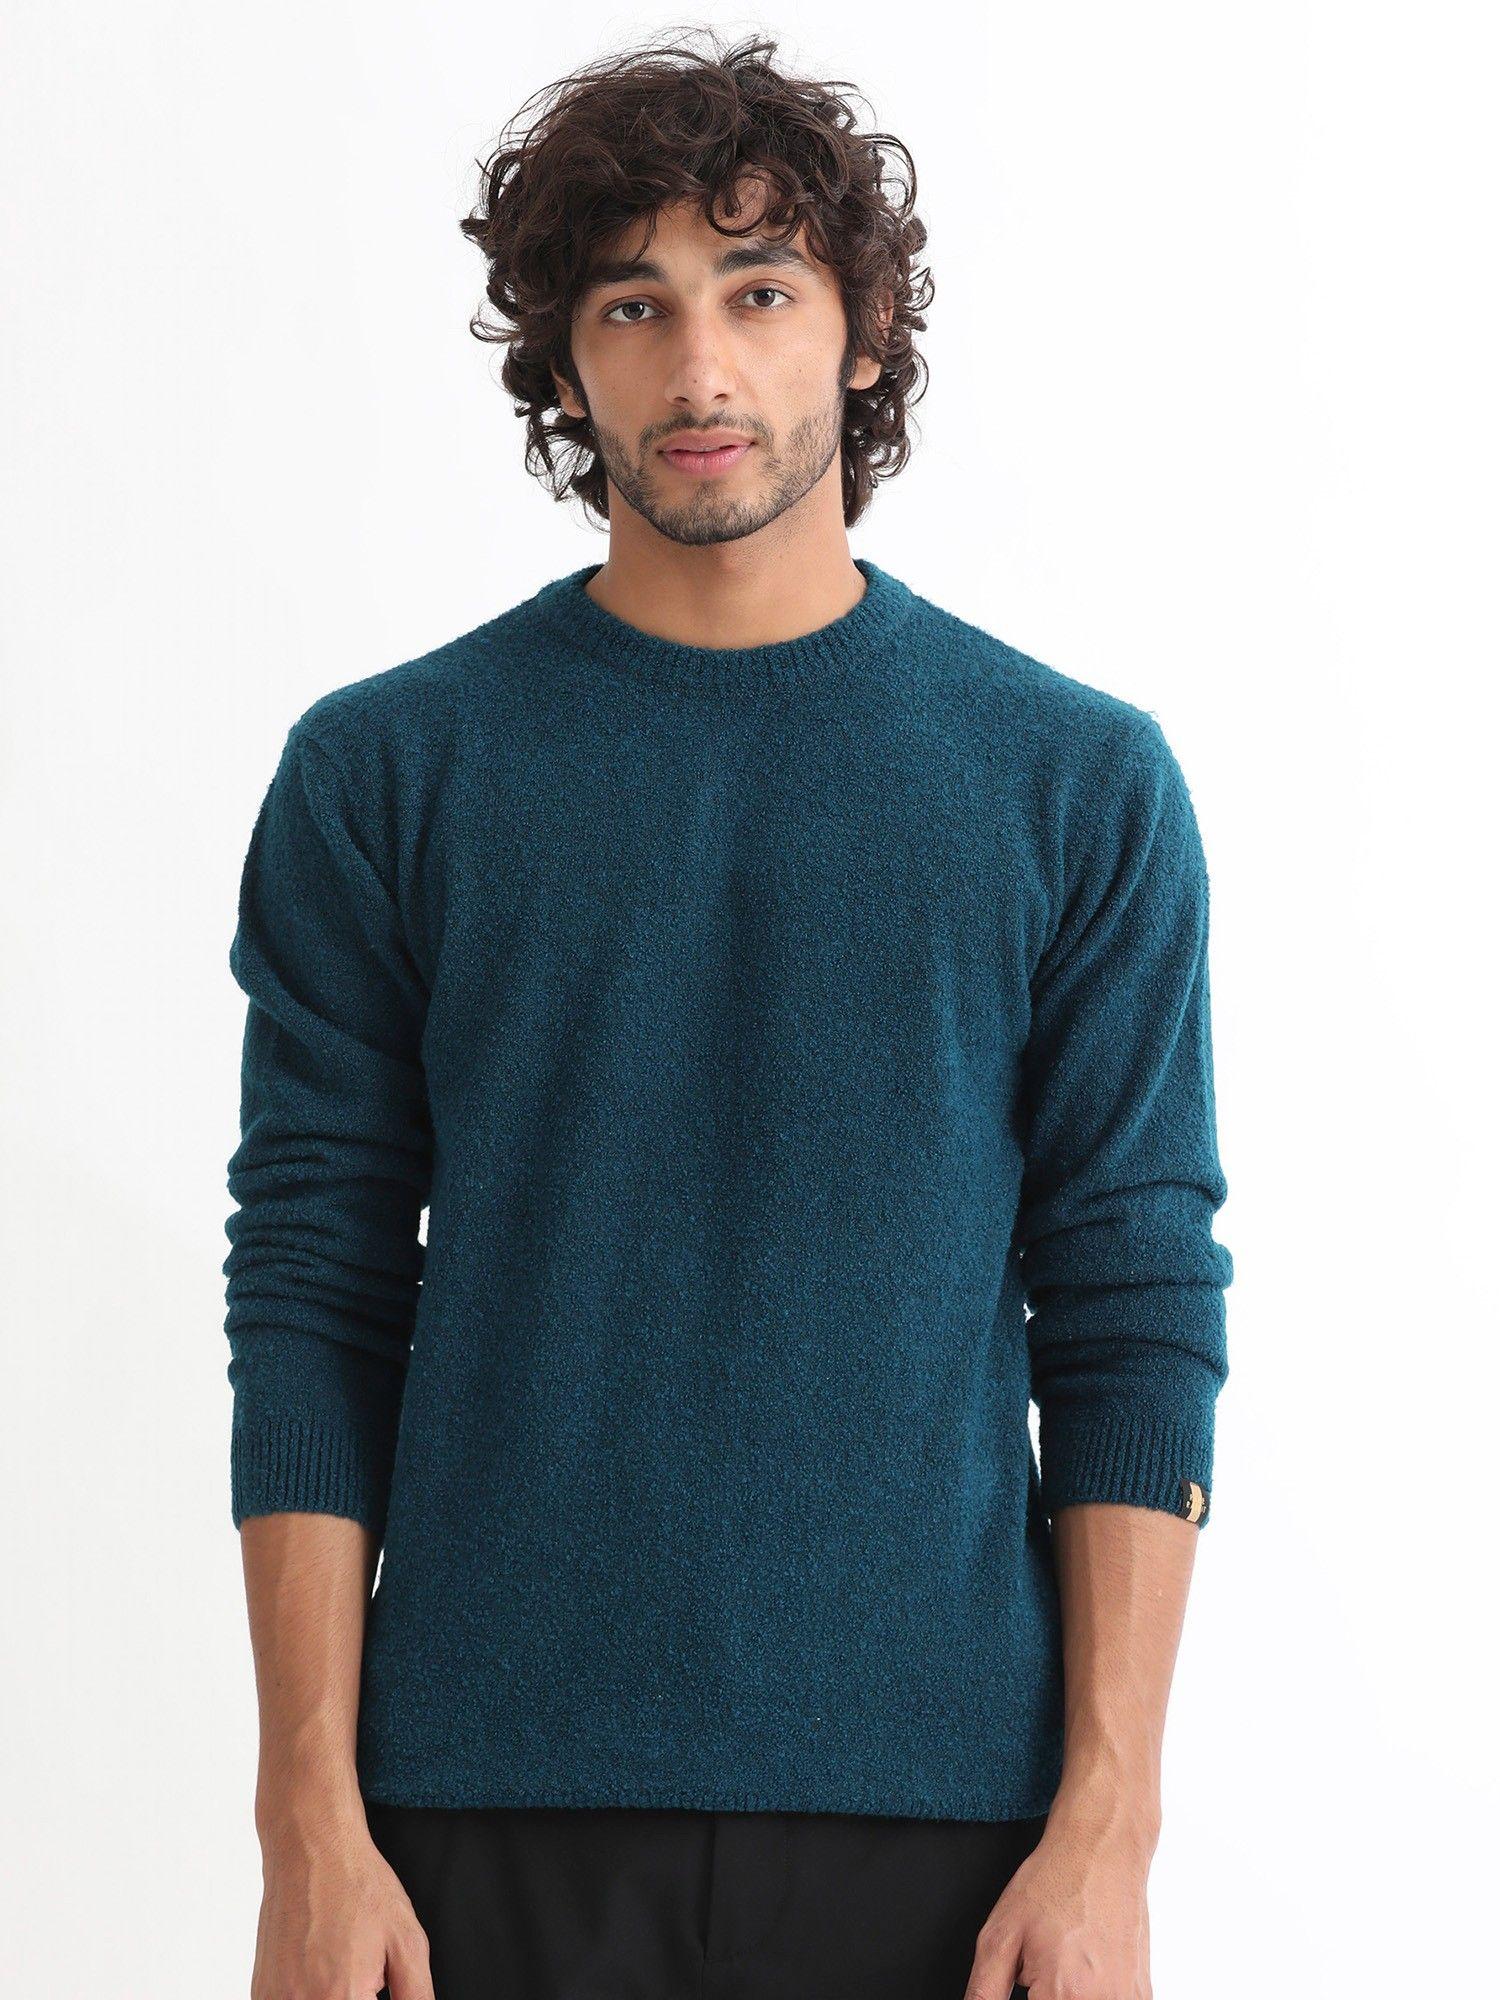 Teal Textured Solid Sweater